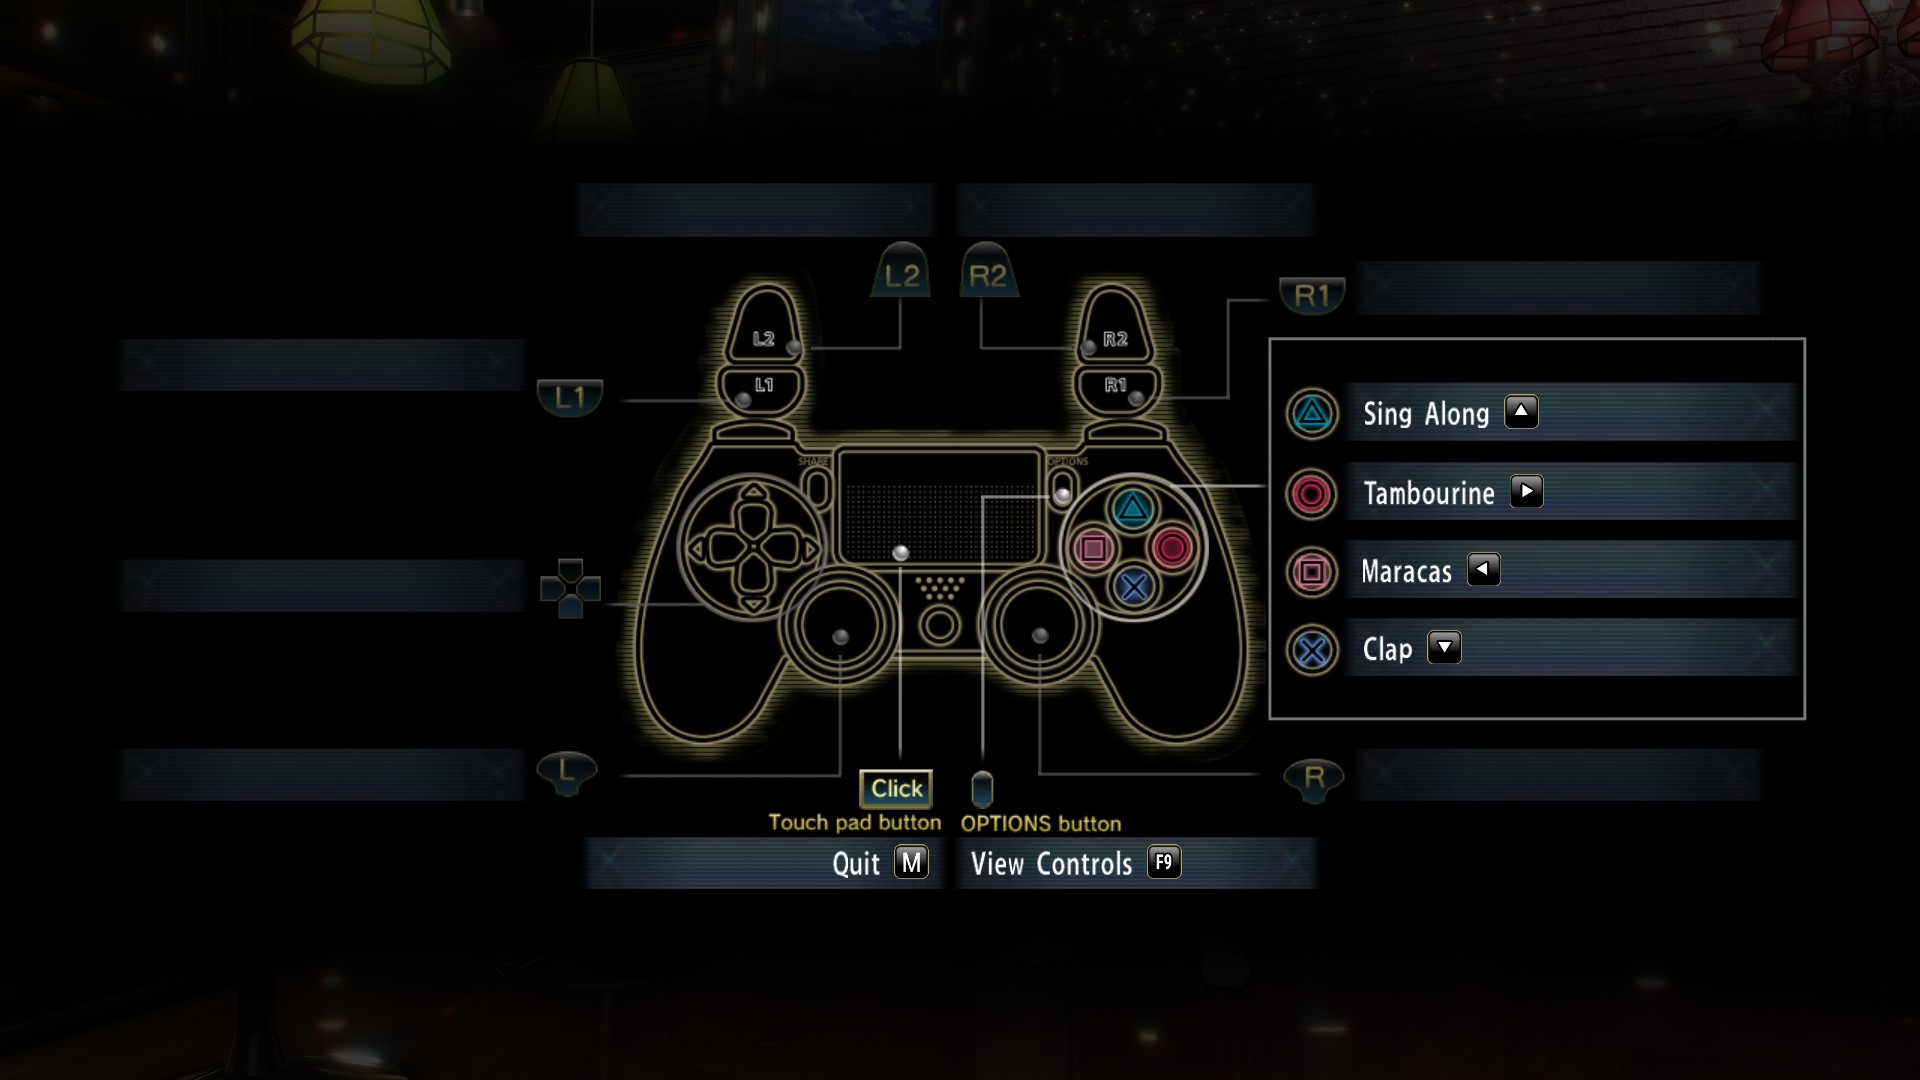 Yakuza 0 Ps3 Button Prompts For Xinput Controllers Yakuza 0 Discussions Generales